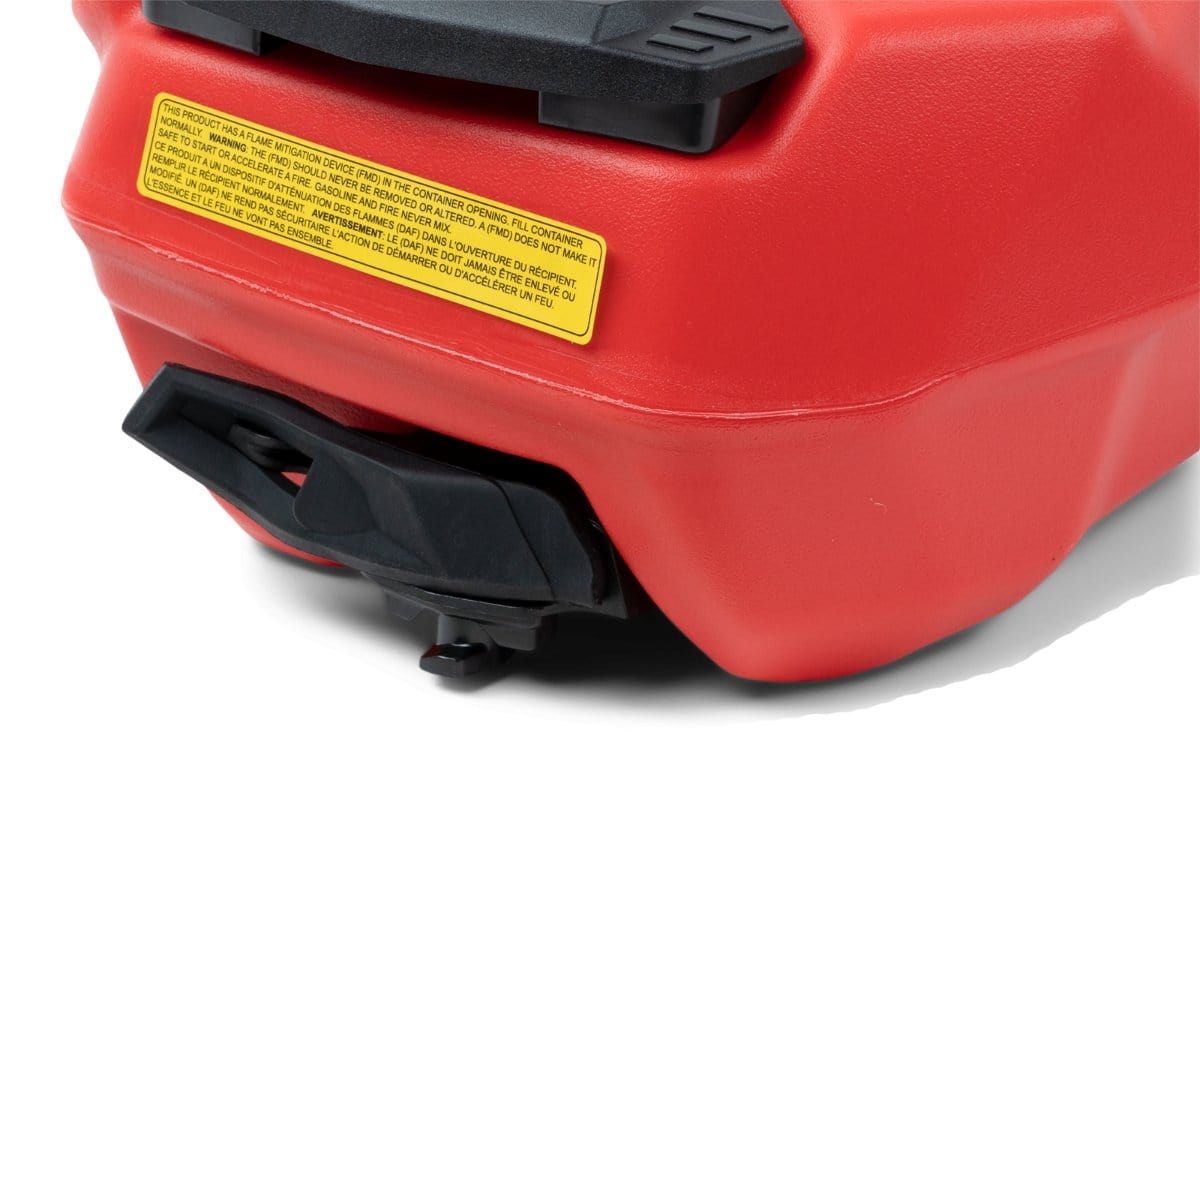 LinQ Stackable Fuel Caddy - 4 gallons